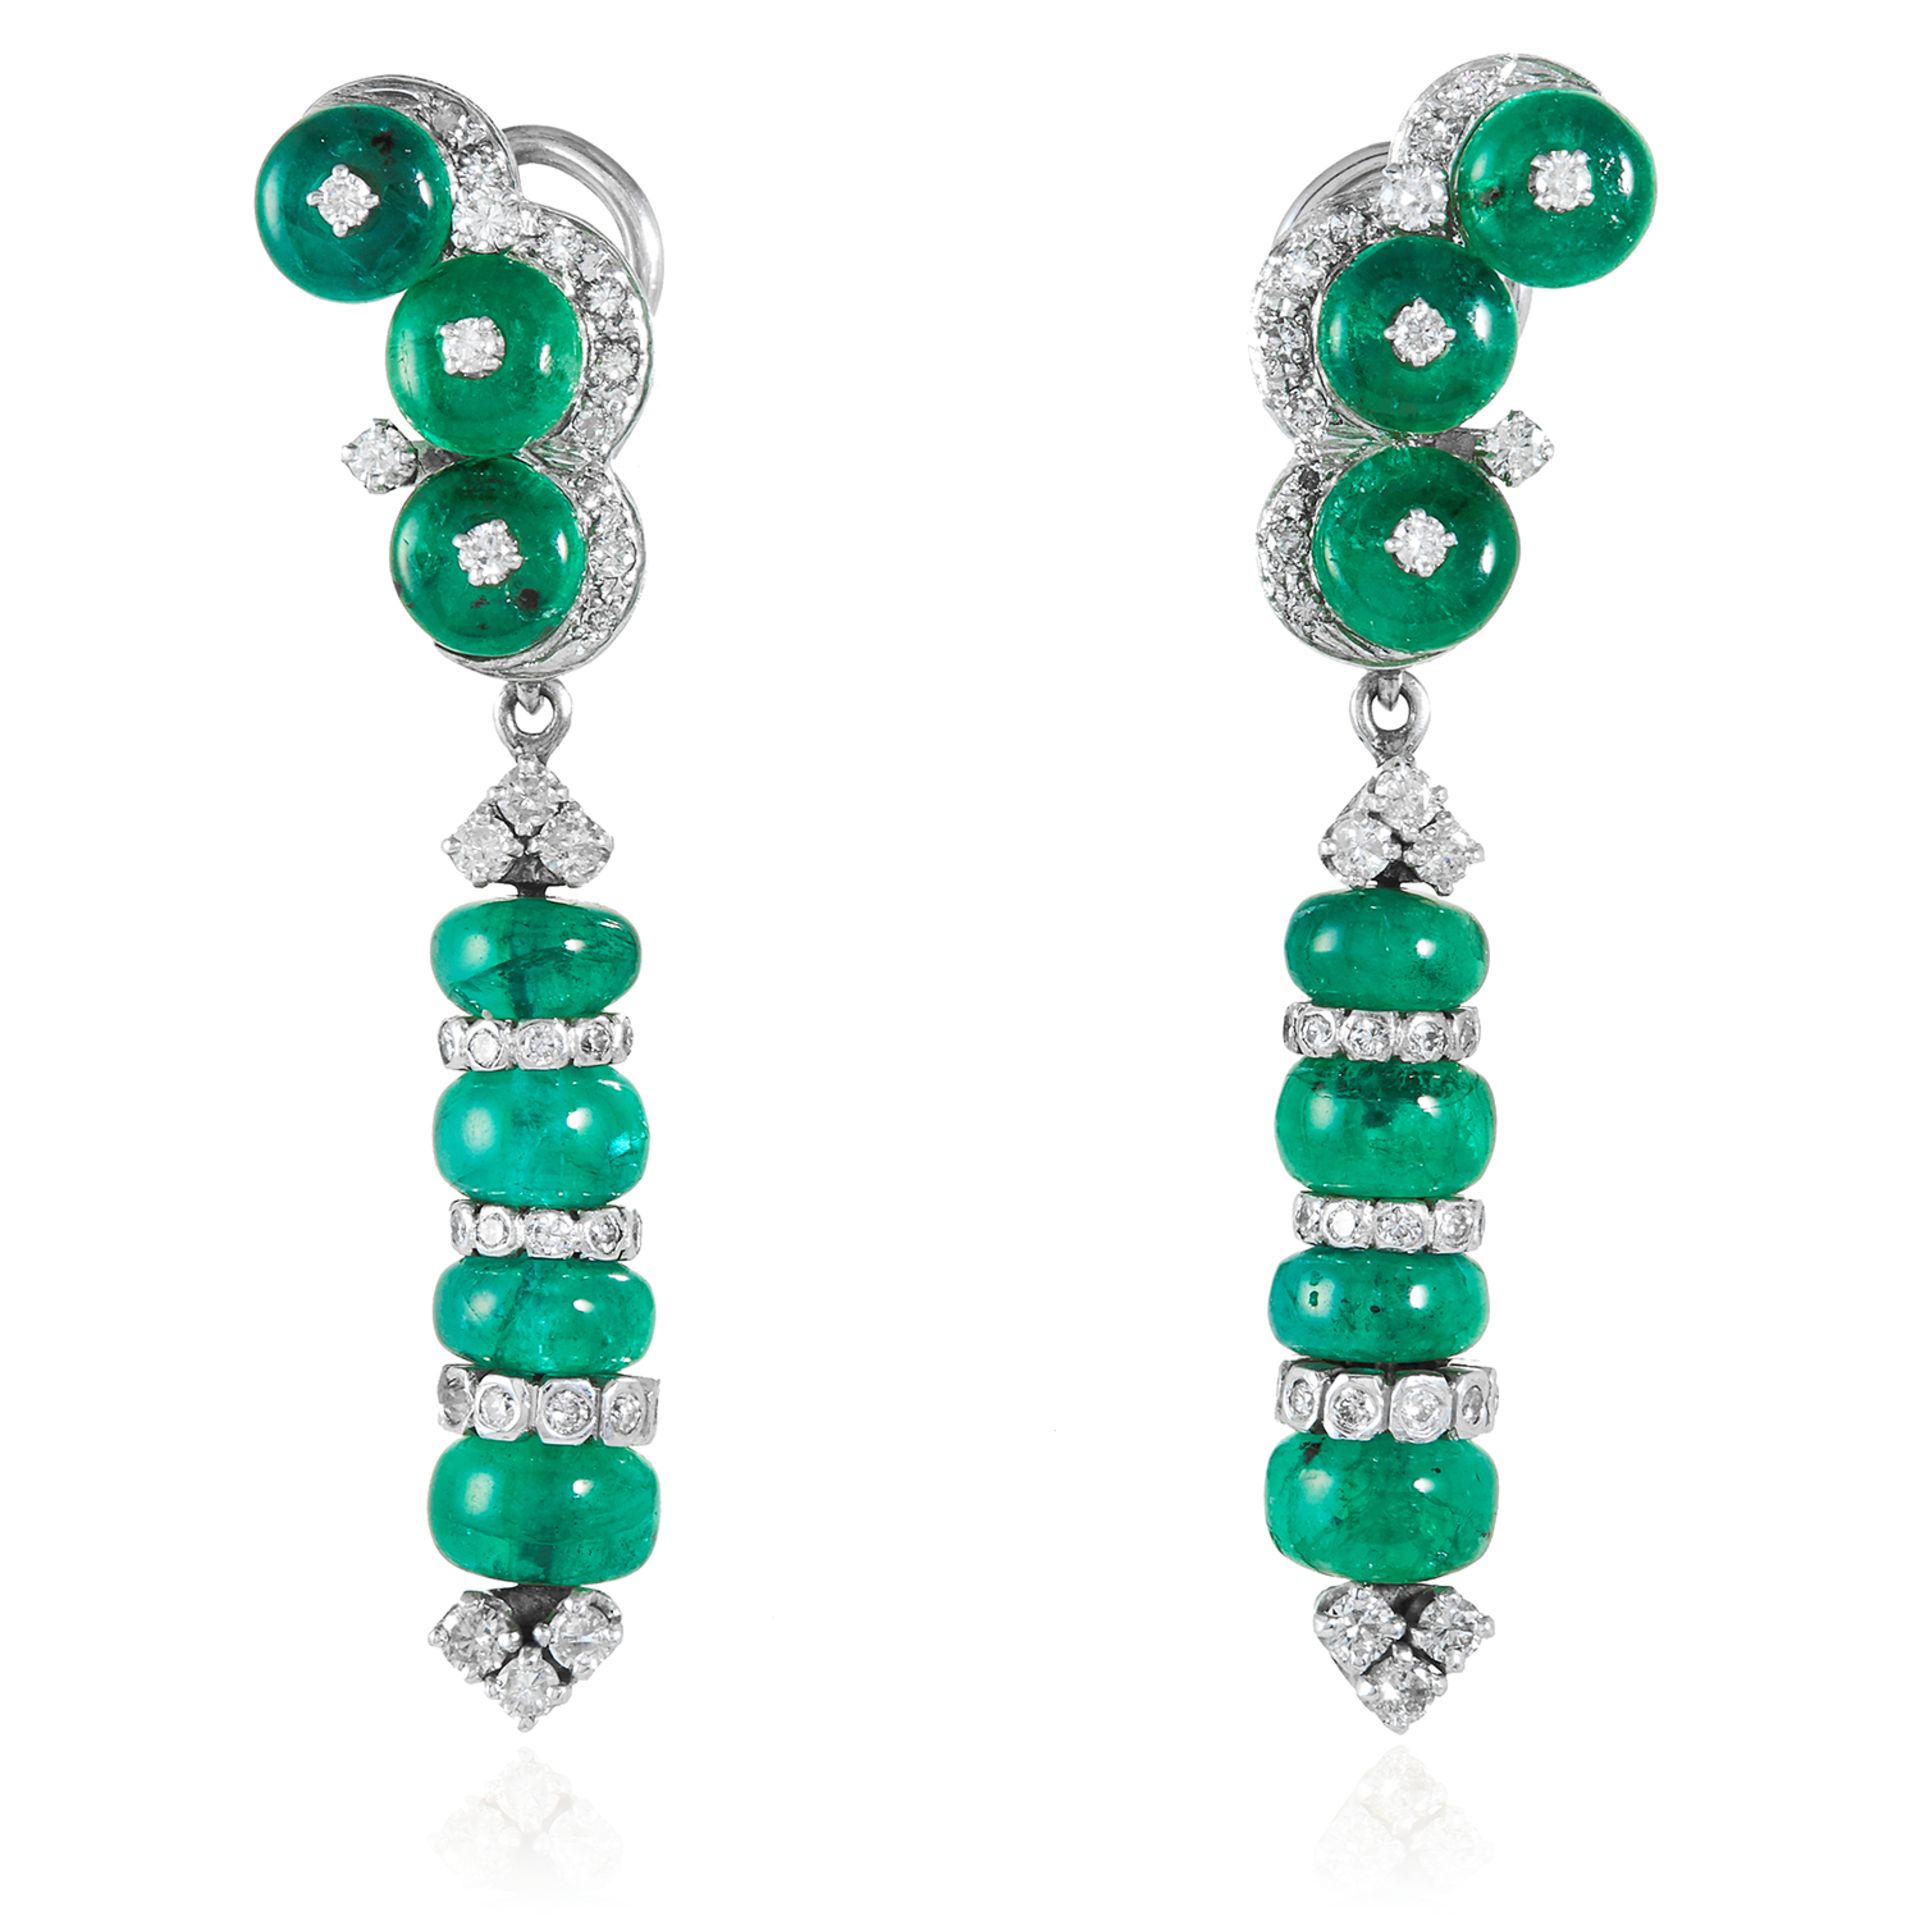 A PAIR OF EMERALD AND DIAMOND DROP EARRINGS in 14ct white gold, comprising of polished circular